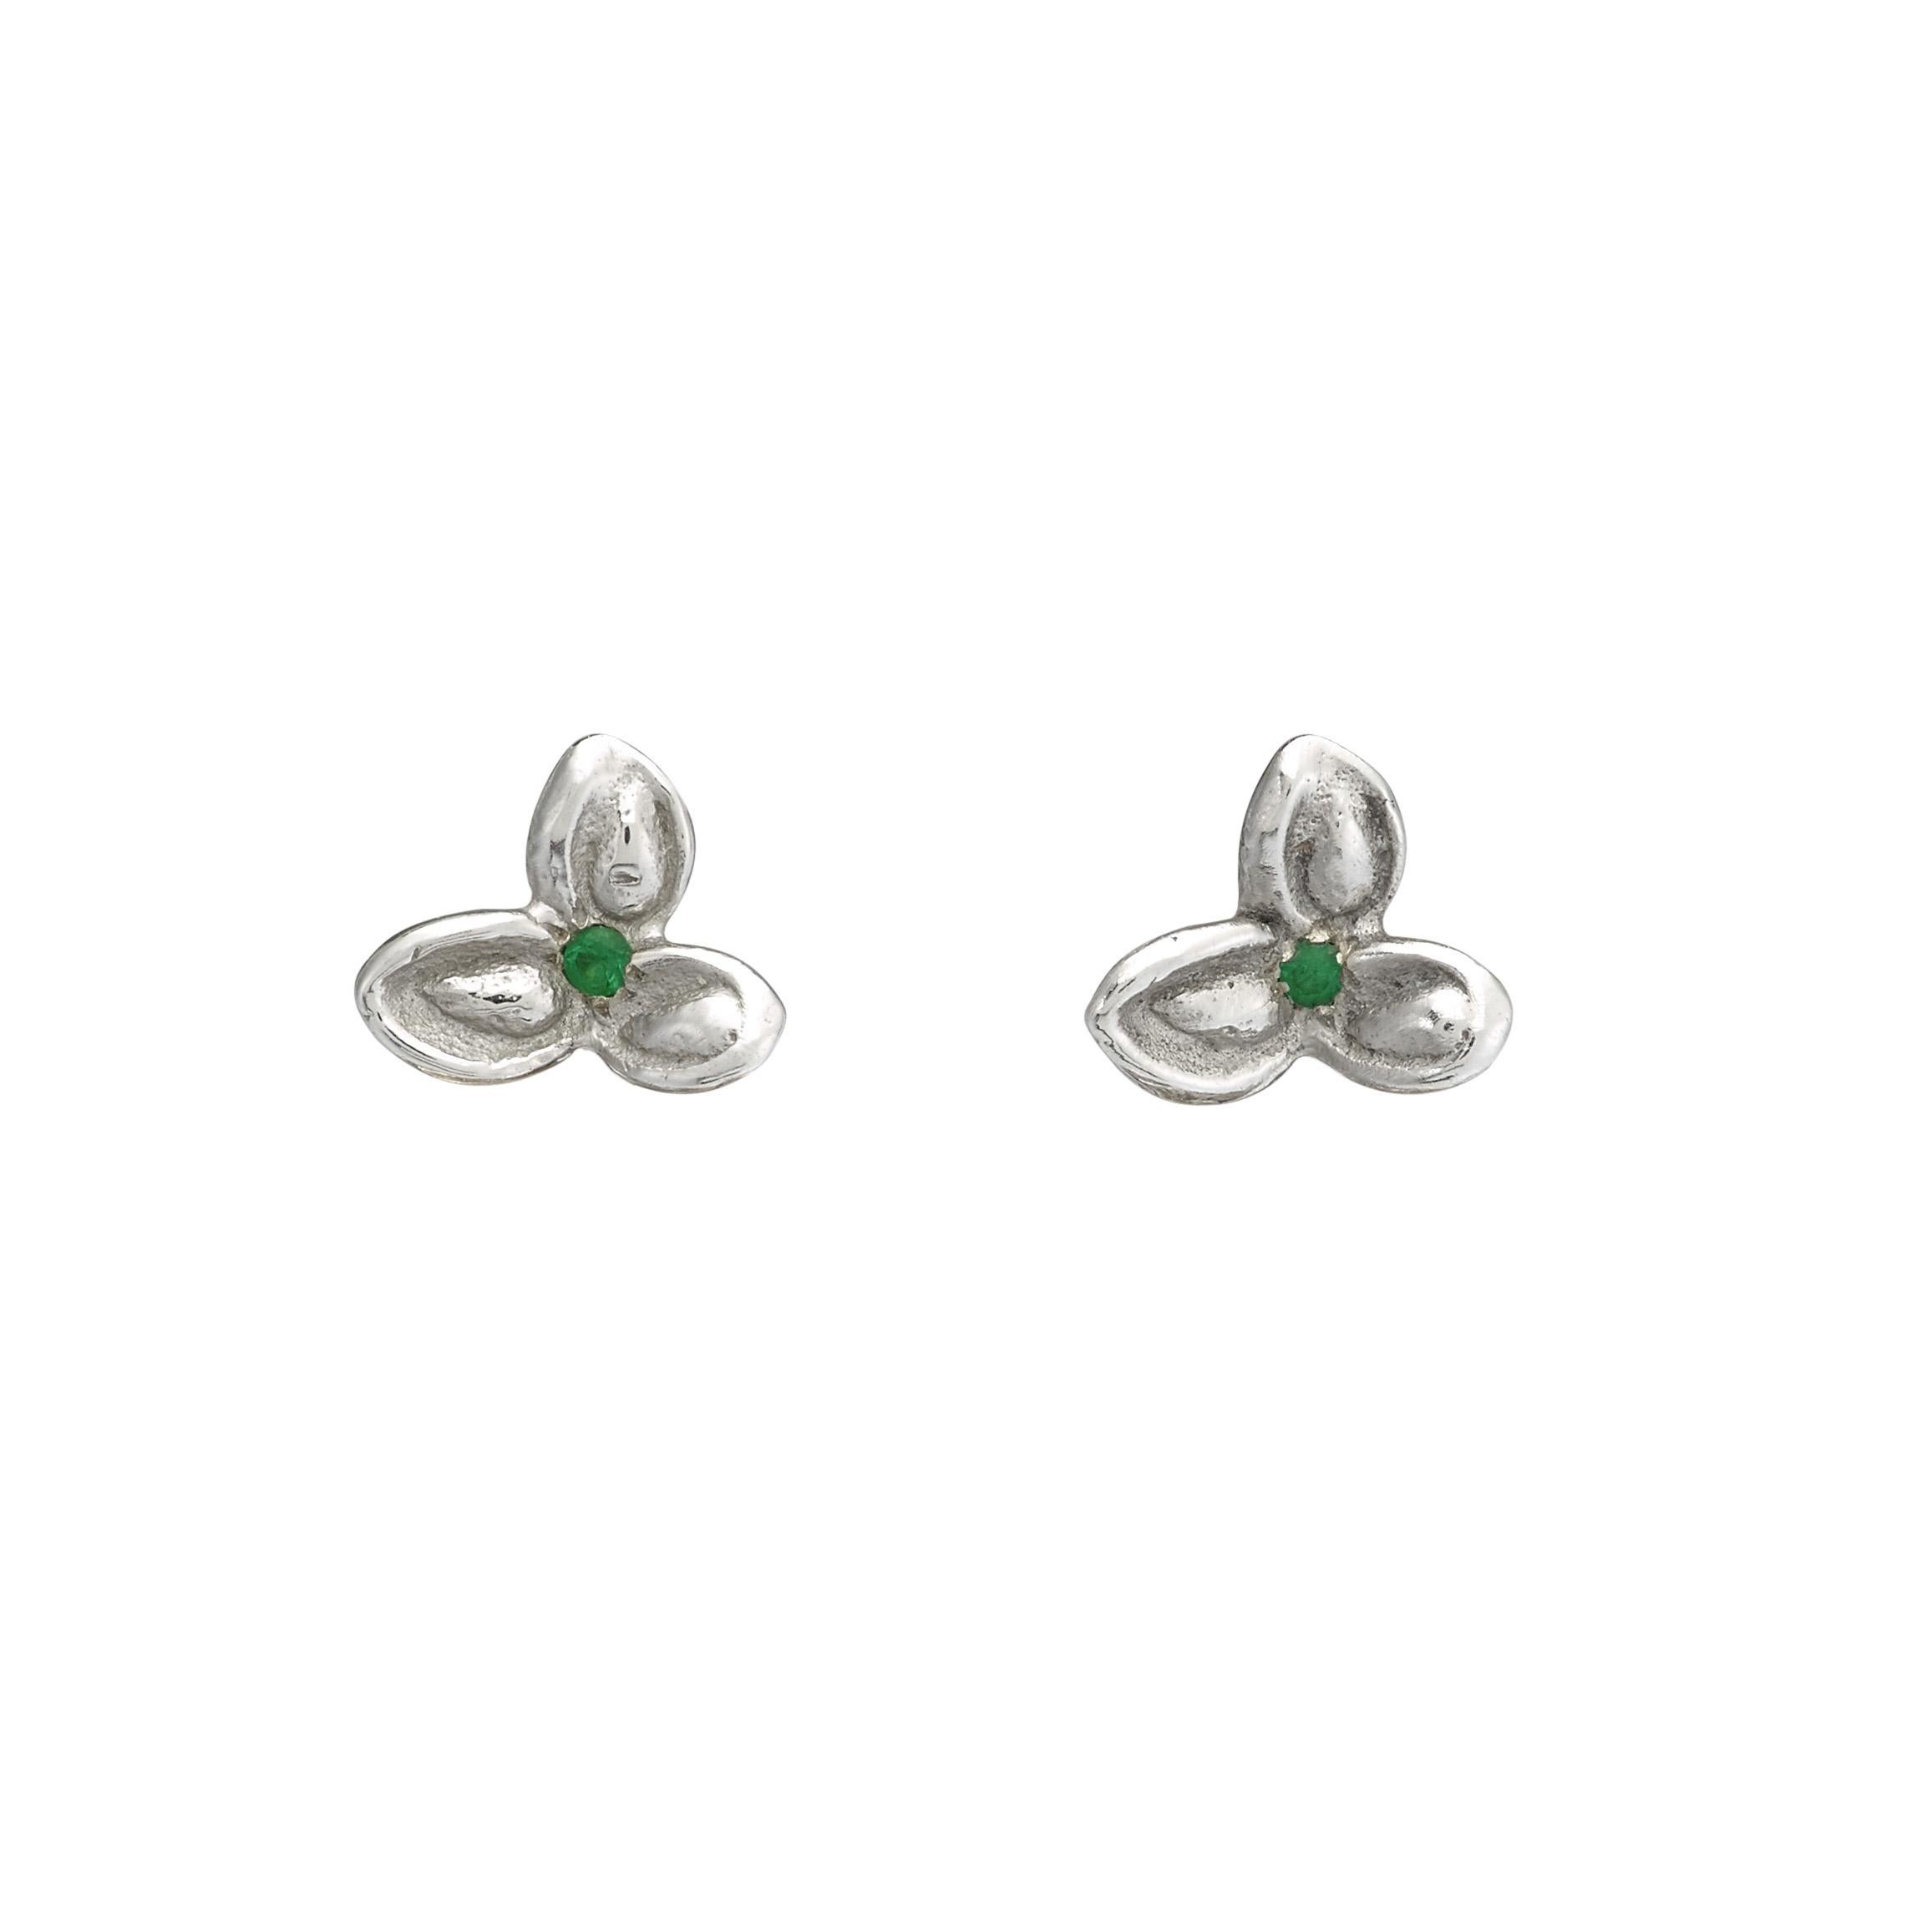 These Anais Rheiner handcrafted pair of 18 karat white gold earrings weigh approximately 4 grams. The flowers are set with emeralds and the fan-shaped part are set with white diamonds, yellow diamonds and pink sapphires. Butterfly fastening for